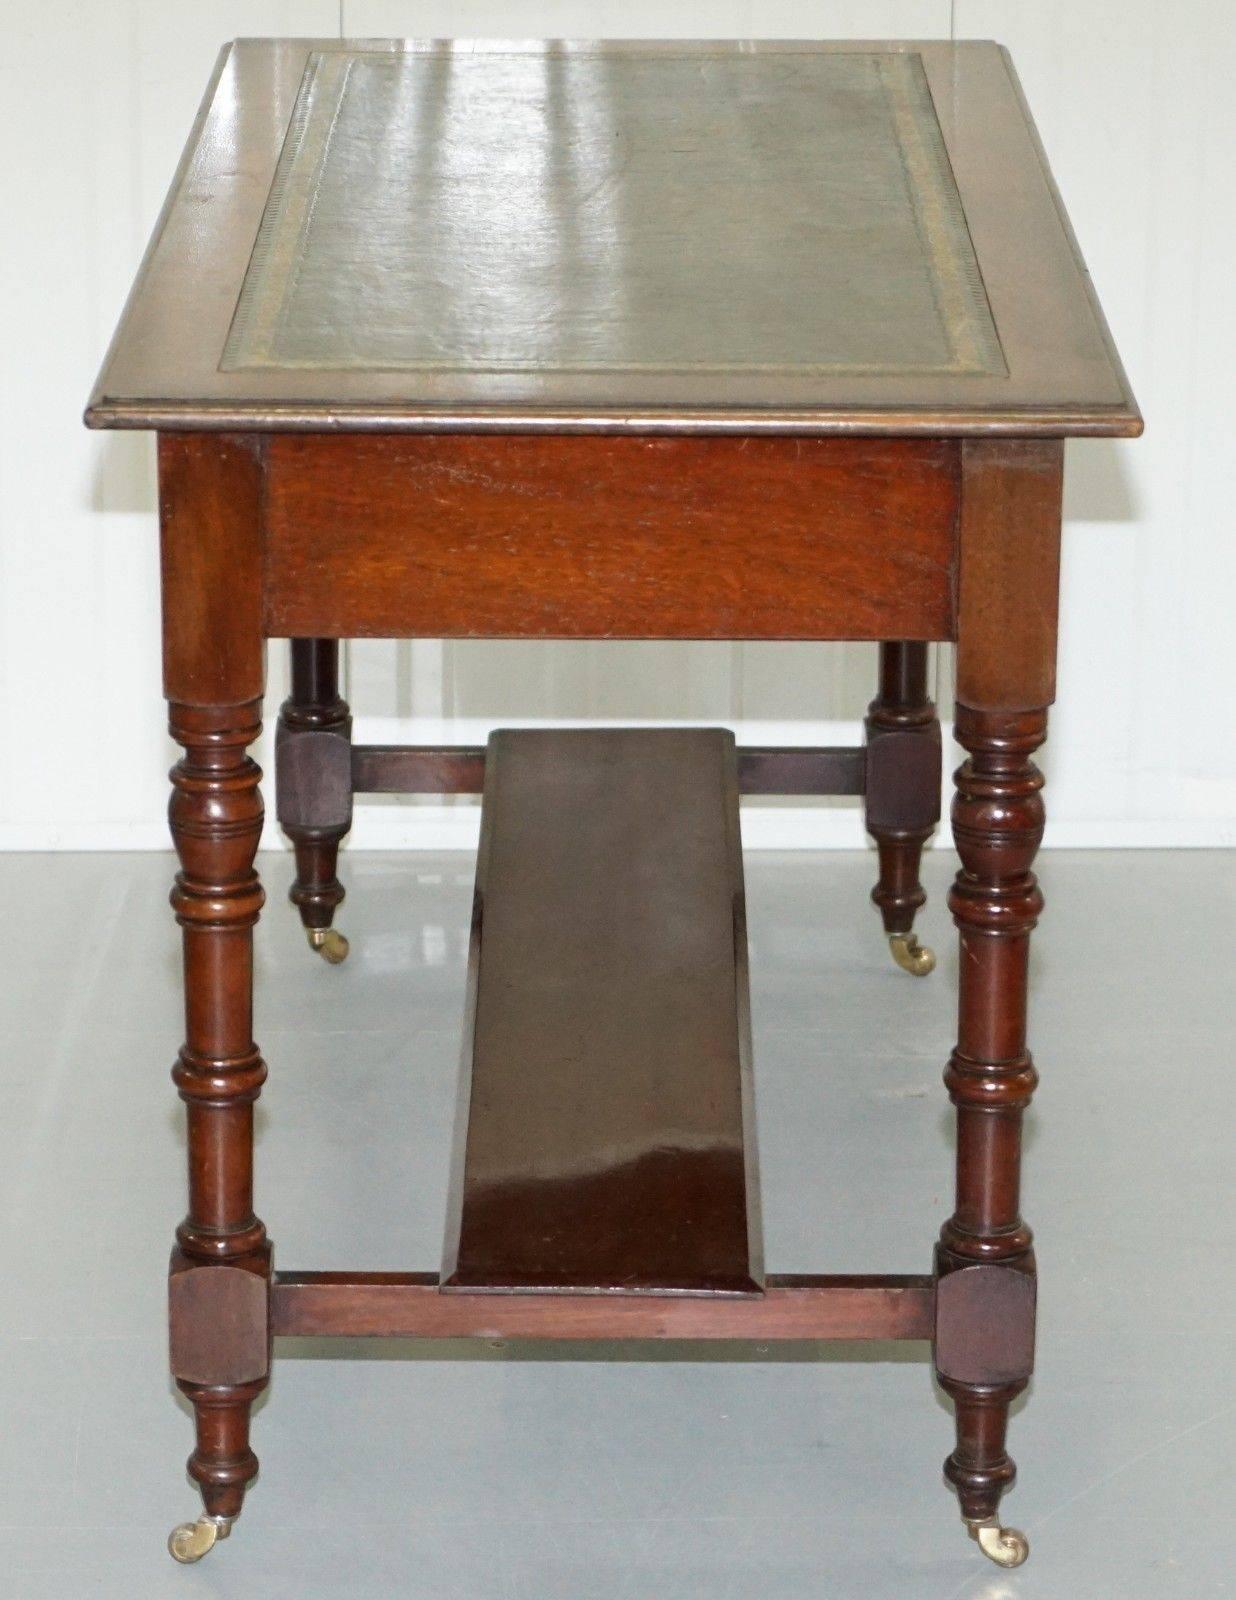 Victorian Mahogany with Leather Writing Surface Desk Writing Table Lovely Piece 2